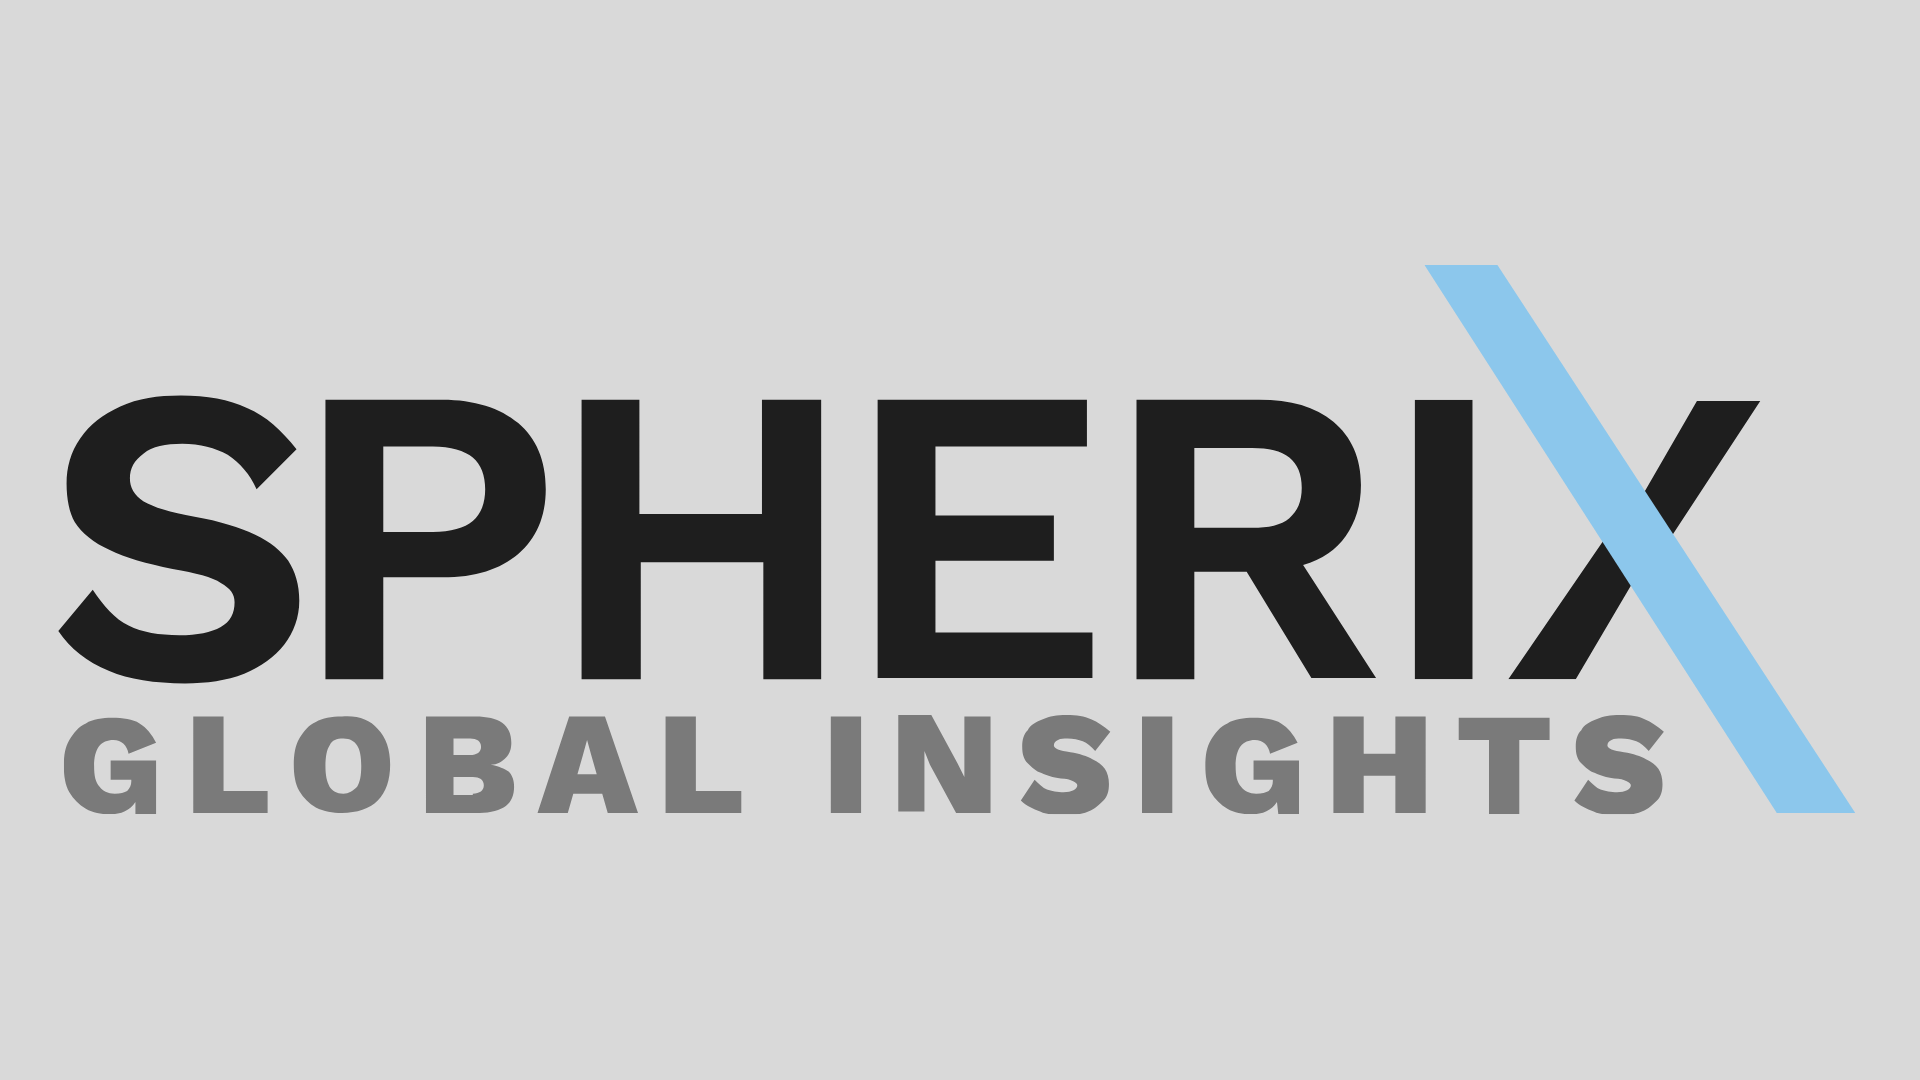 Partner Q&A: Spherix Global Insights' Role in Shaping the Future of Dermatology